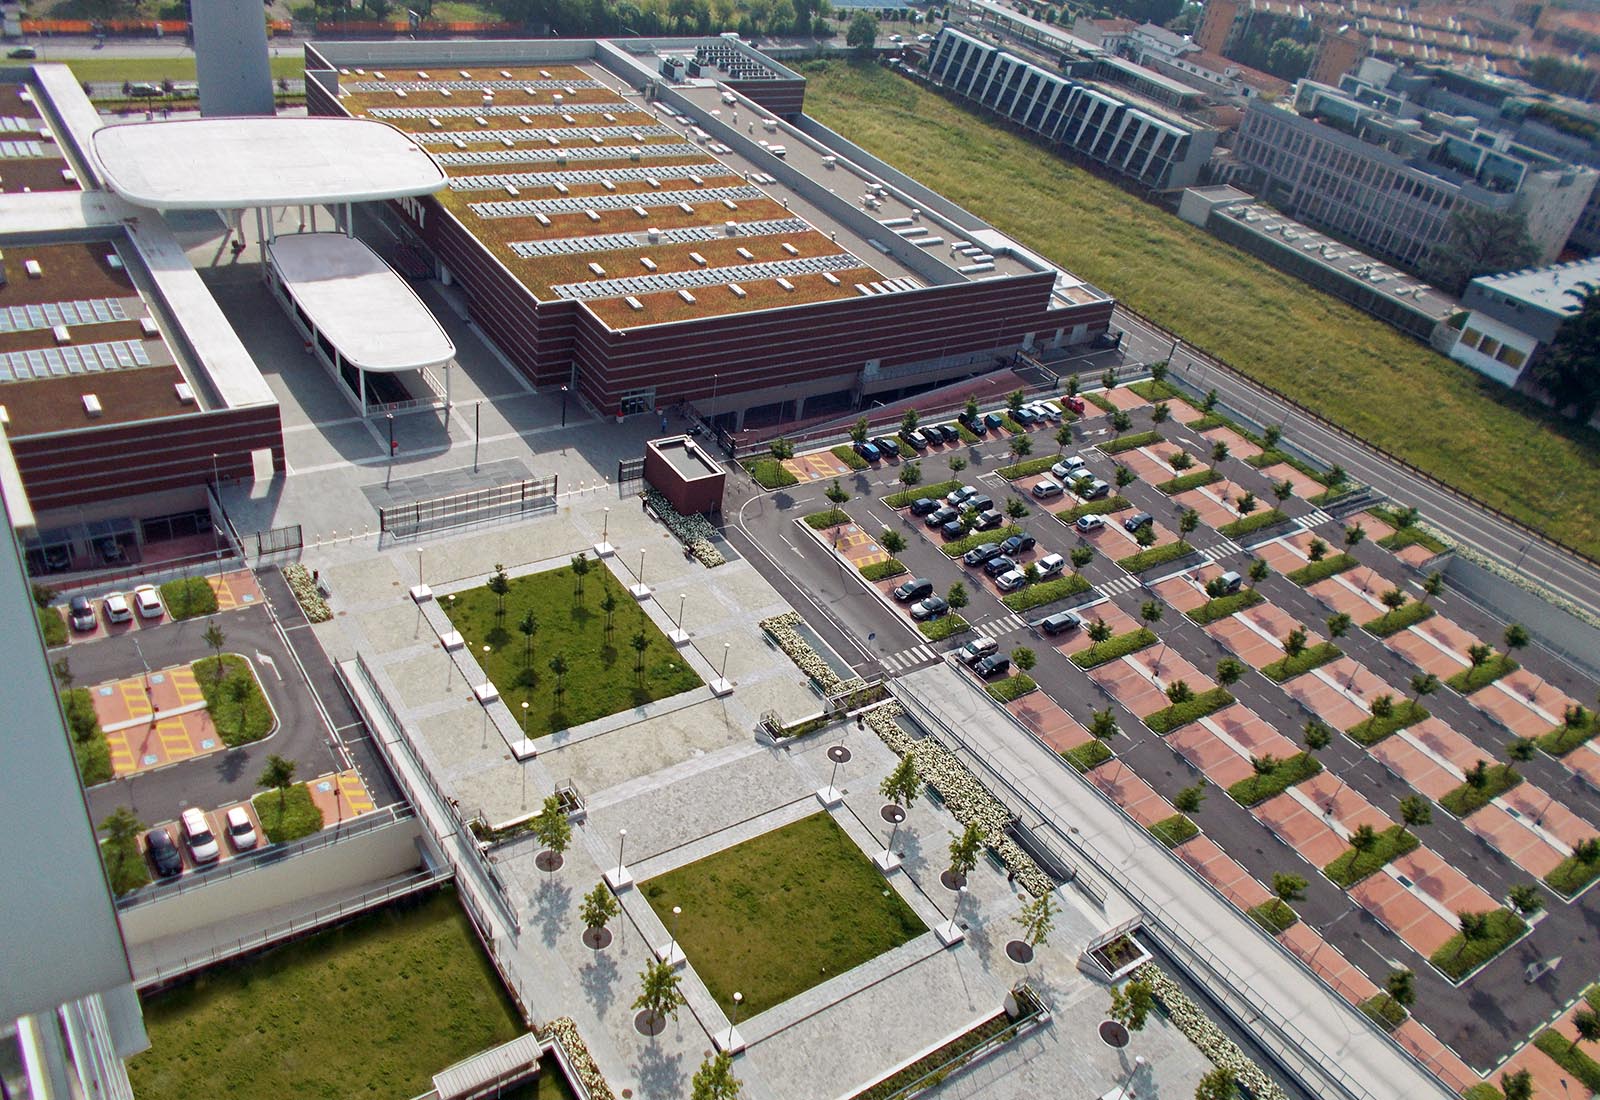 Square and parking lots in Adriano area Milan - View